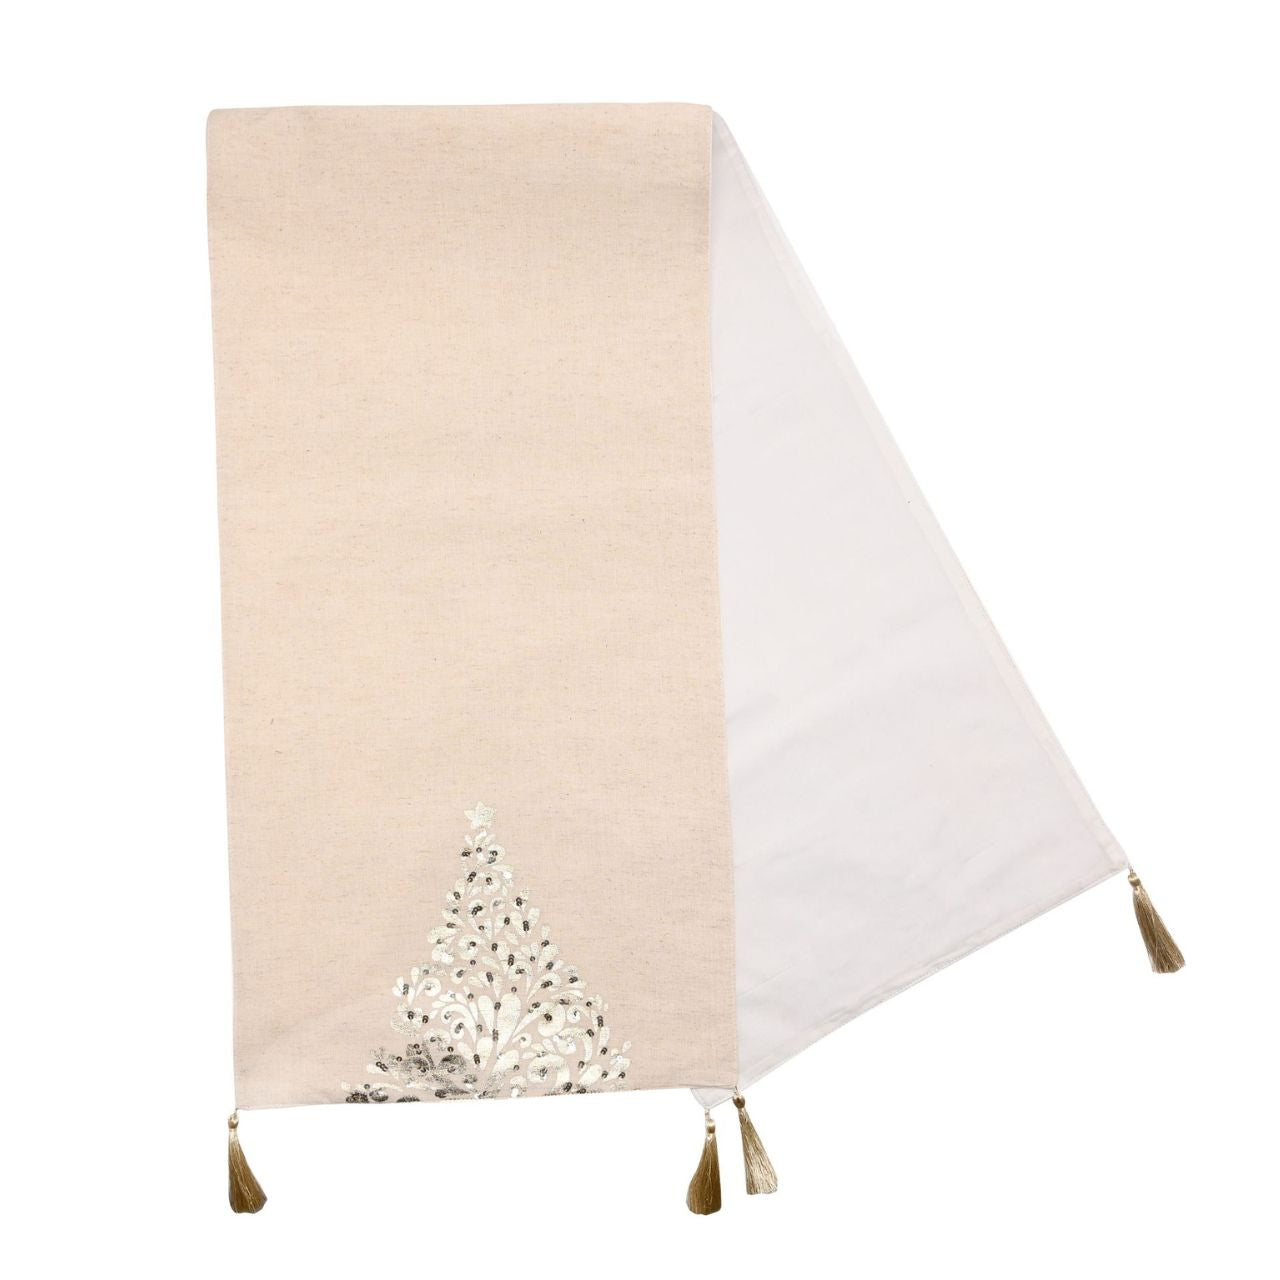 Natural Table Runner with Gold Christmas Tree Design  A natural table runner with gold Christmas tree.  This delightful table runner will enhance dining tables throughout the festive period.